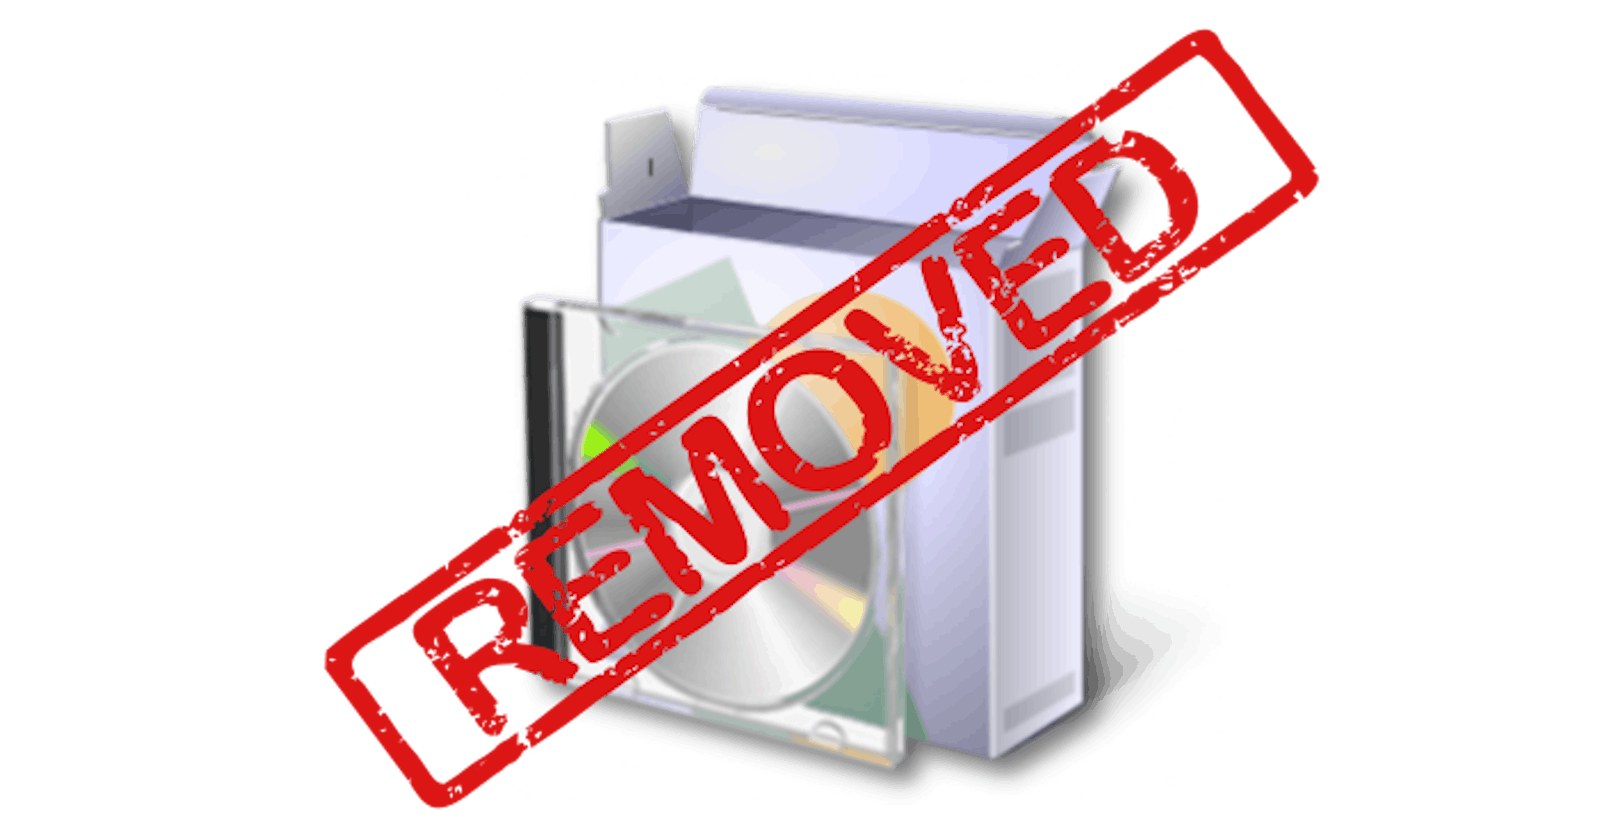 Solving the Dreaded 'Removed' Windows Features Problem